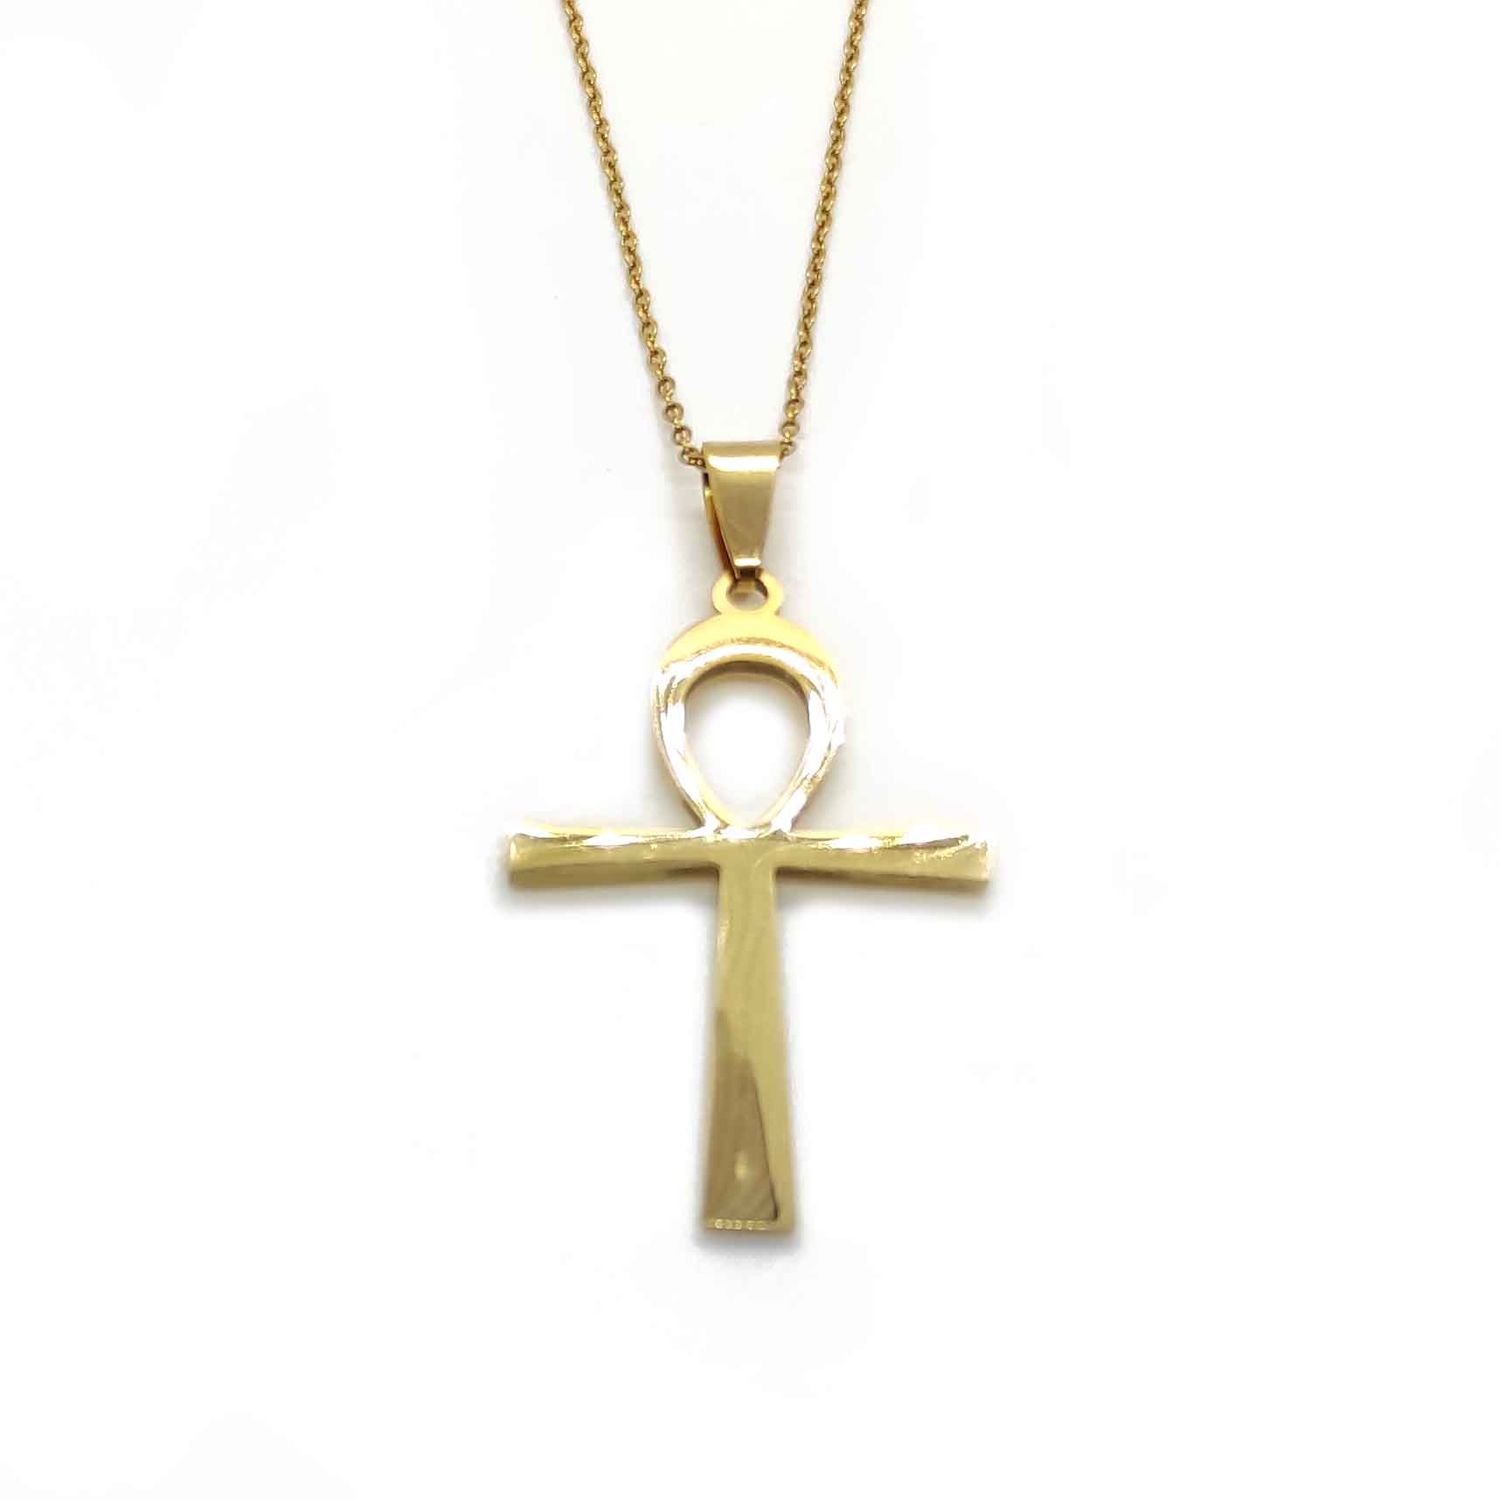 Ankh necklace (Gold toned)